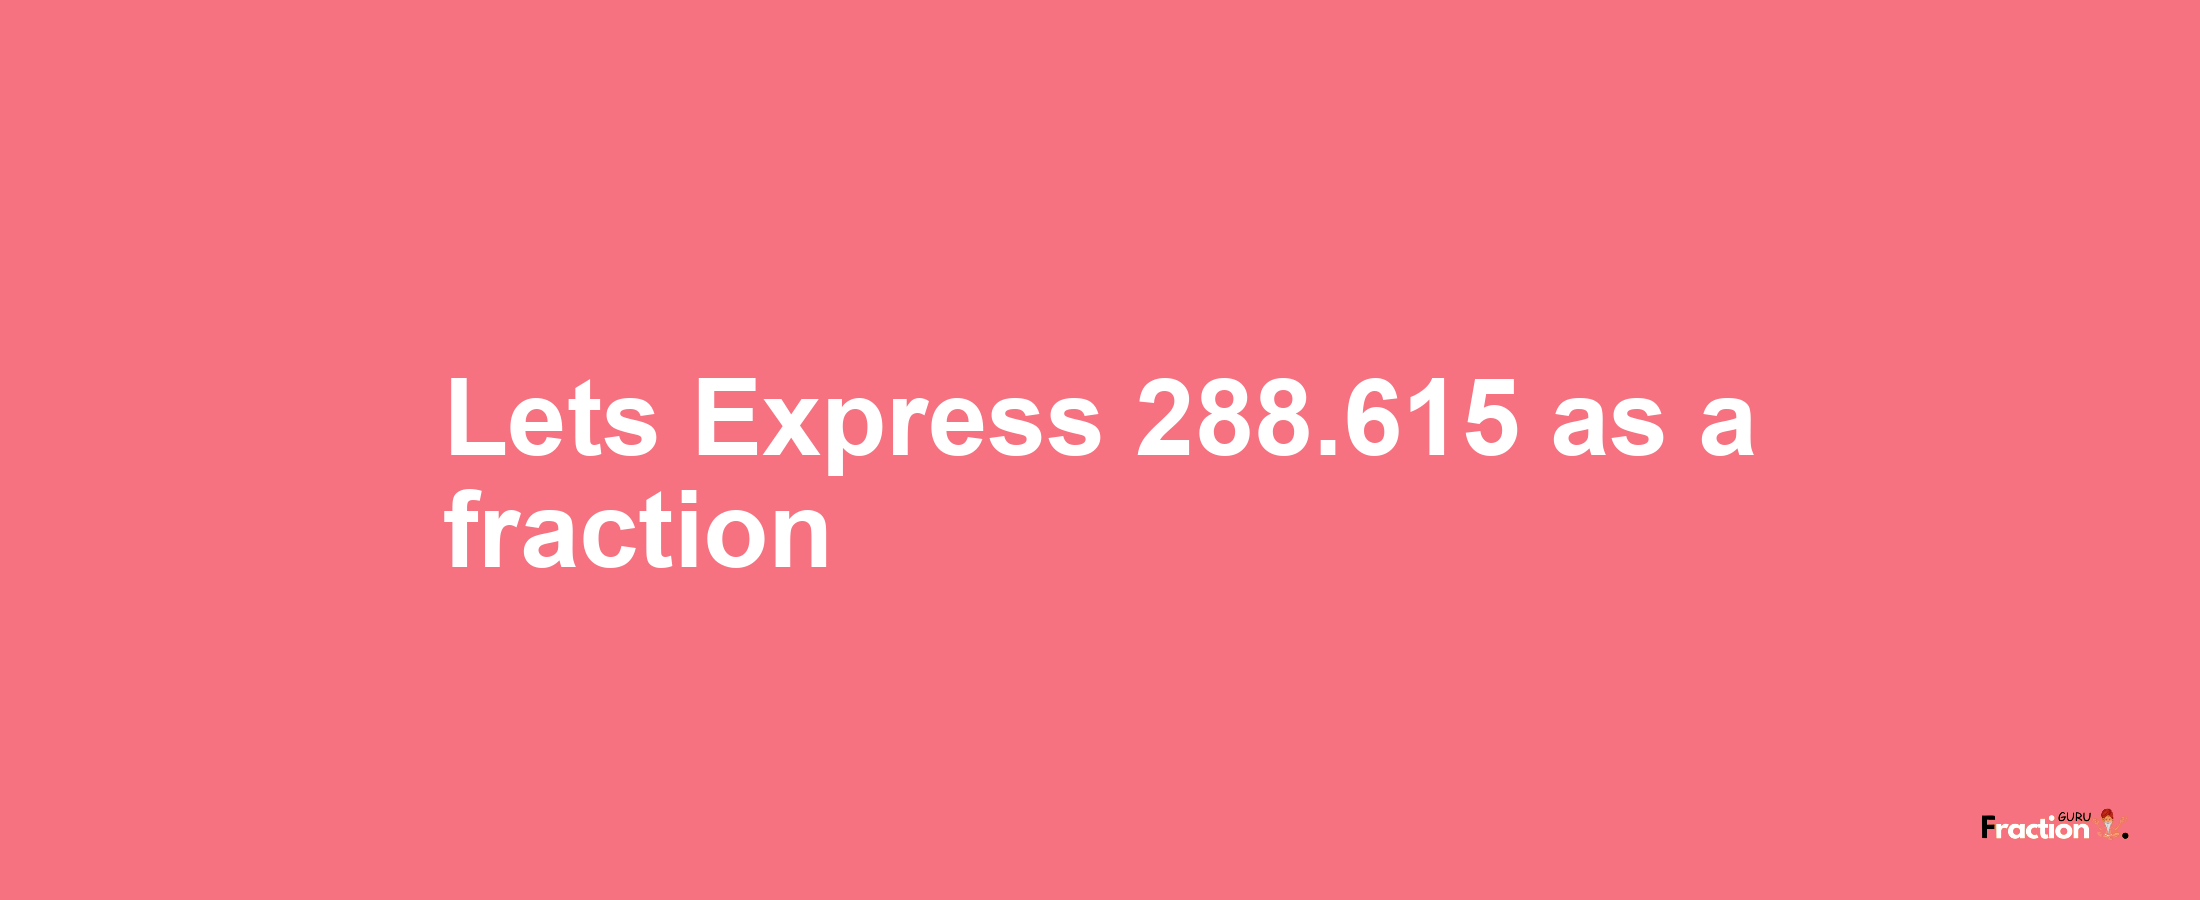 Lets Express 288.615 as afraction